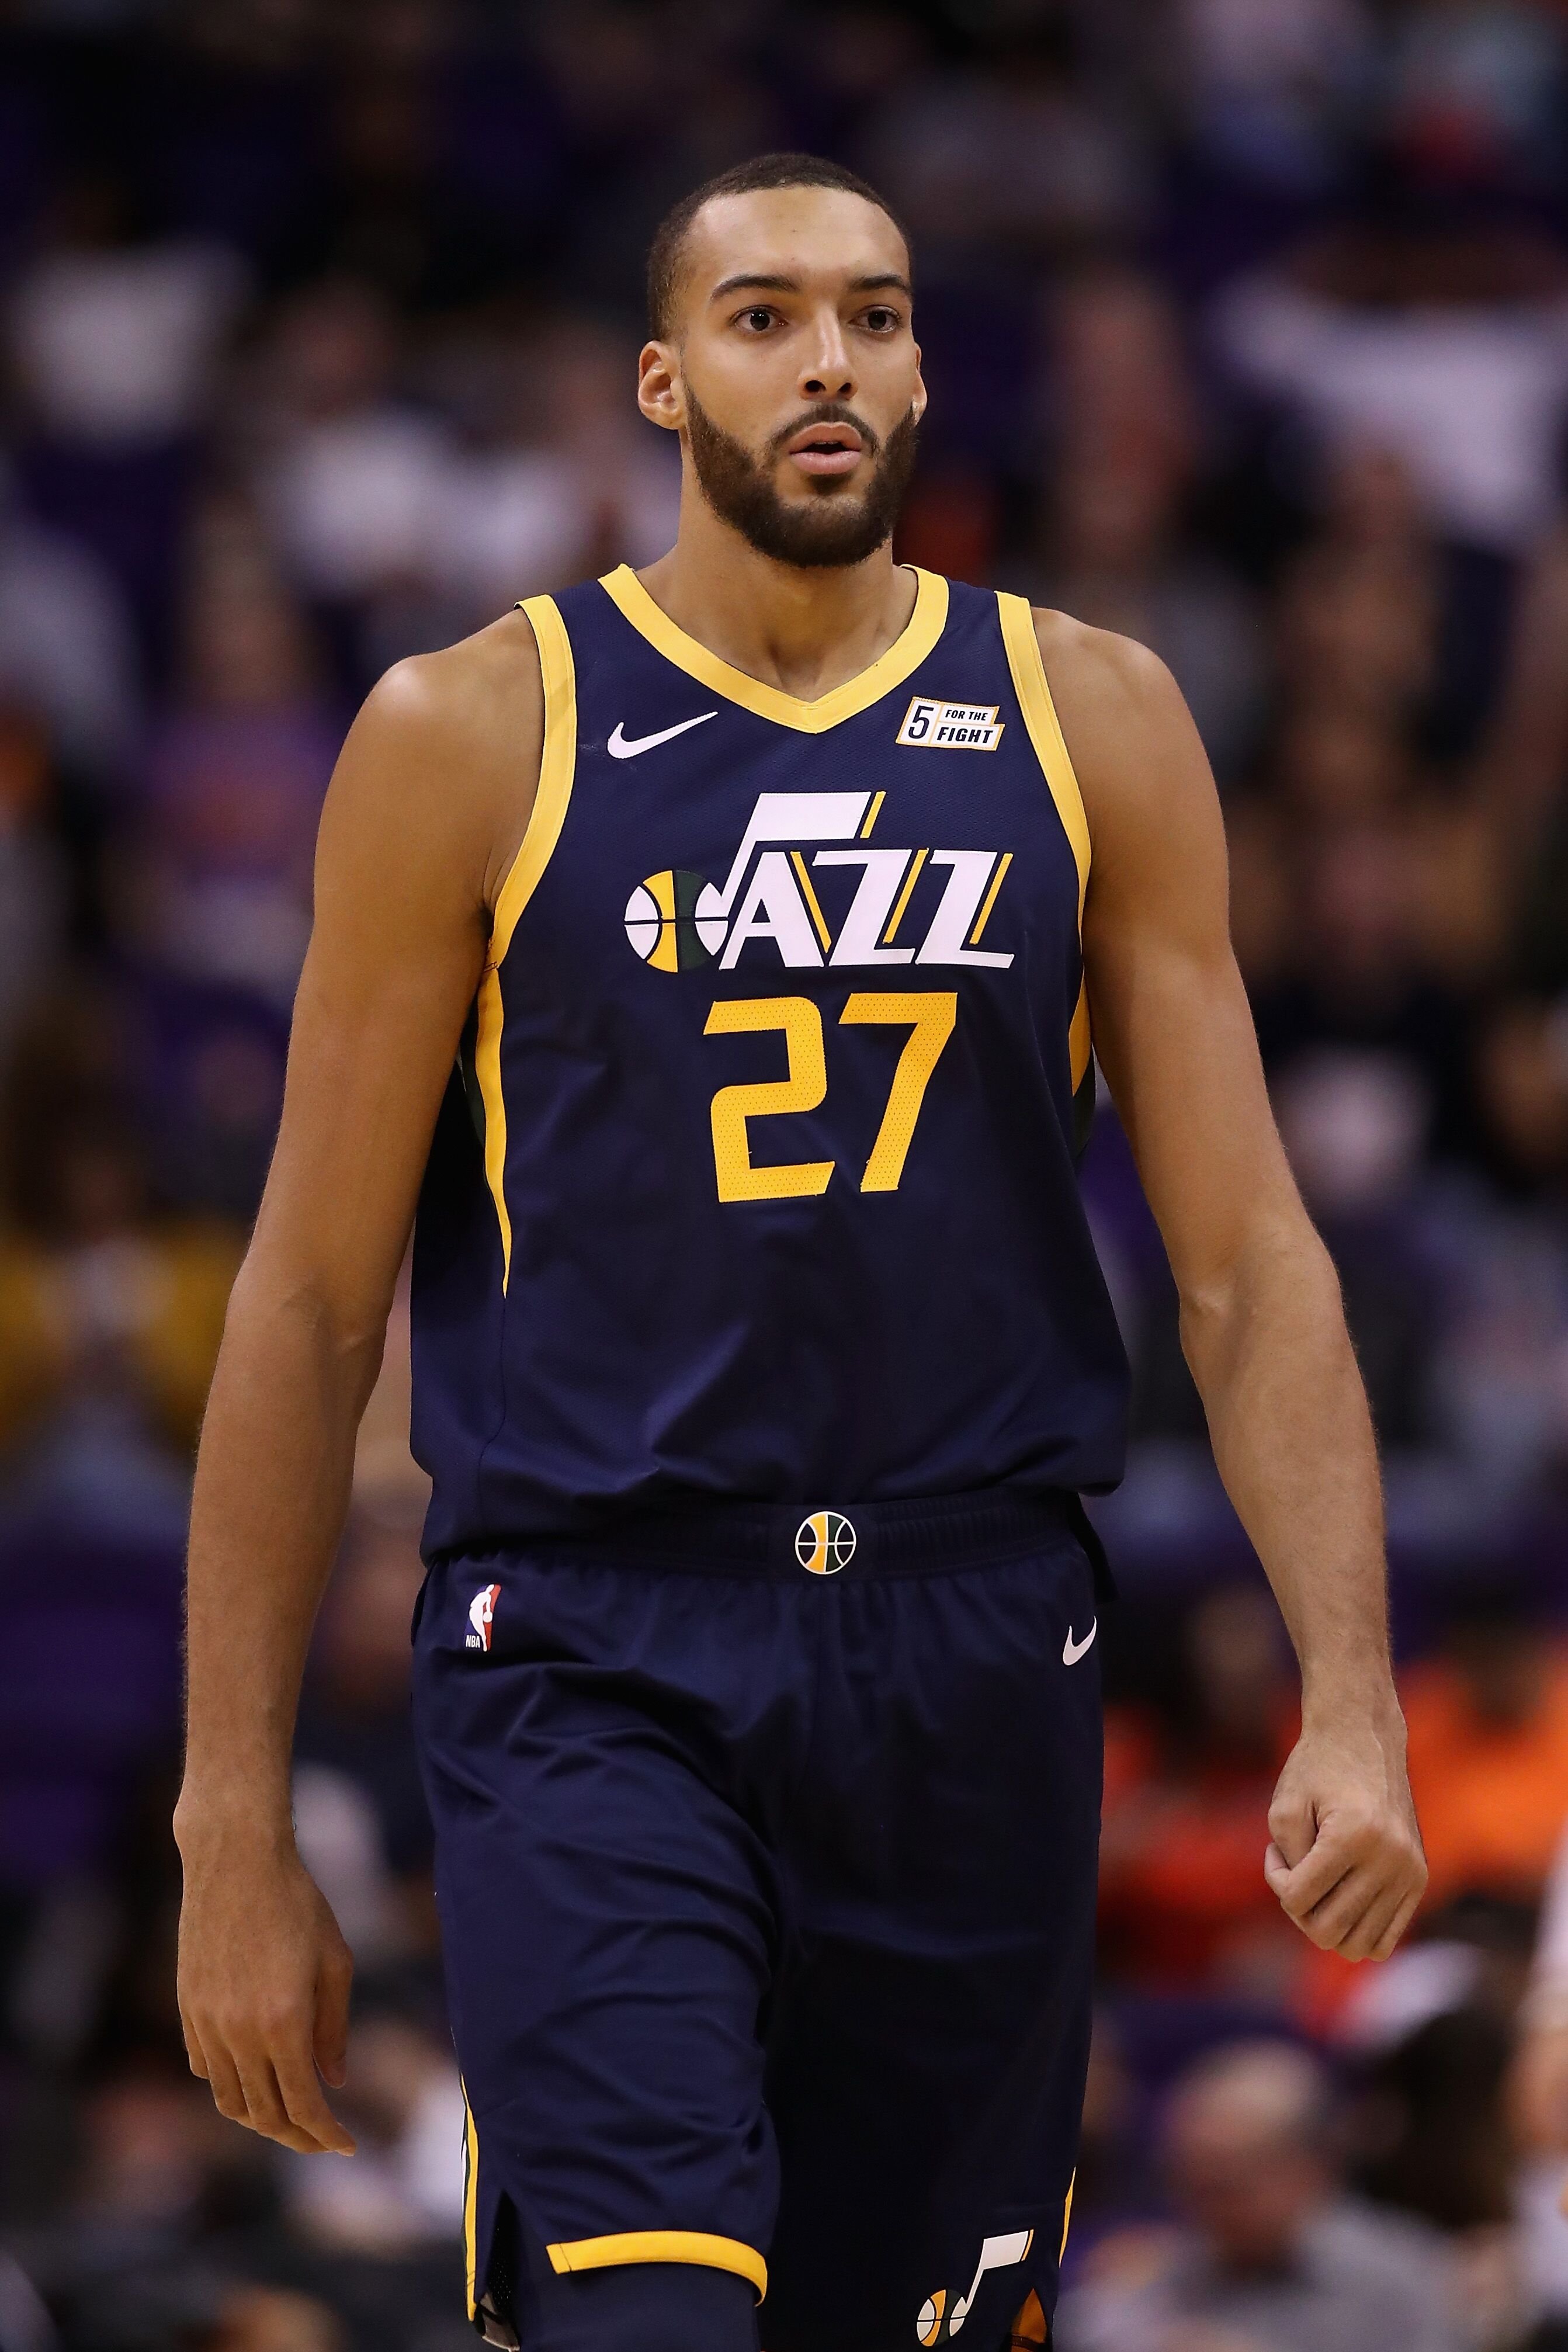 Rudy Gobert during the second half of the NBA game against the Phoenix Suns at Talking Stick Resort Arena on October 28, 2019 in Phoenix, Arizona. | Source: Getty Images